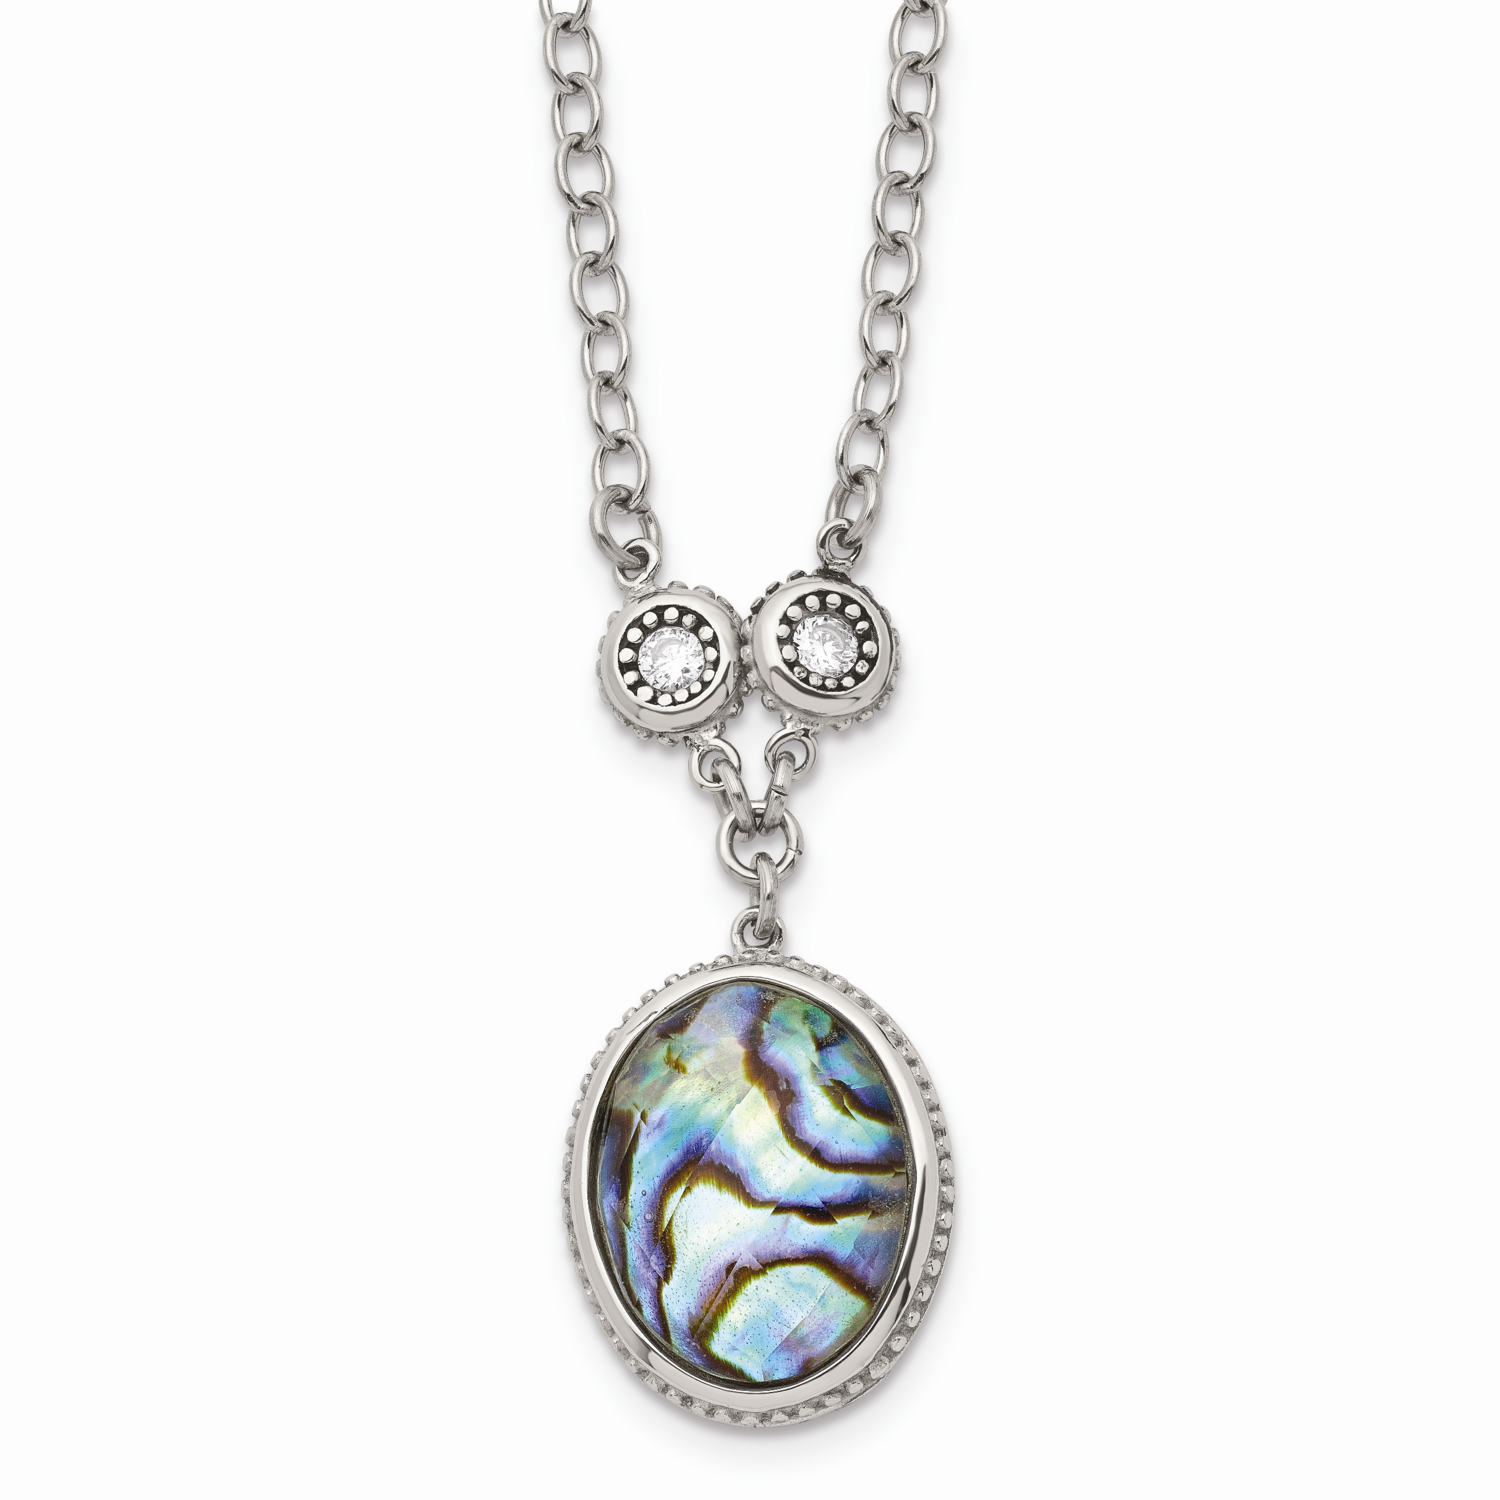 Antiqued Imitation Abalone/CZ Stone Stone 1.5 Inch Extension Necklac Stainless Steel Polished SRN1500-18.5